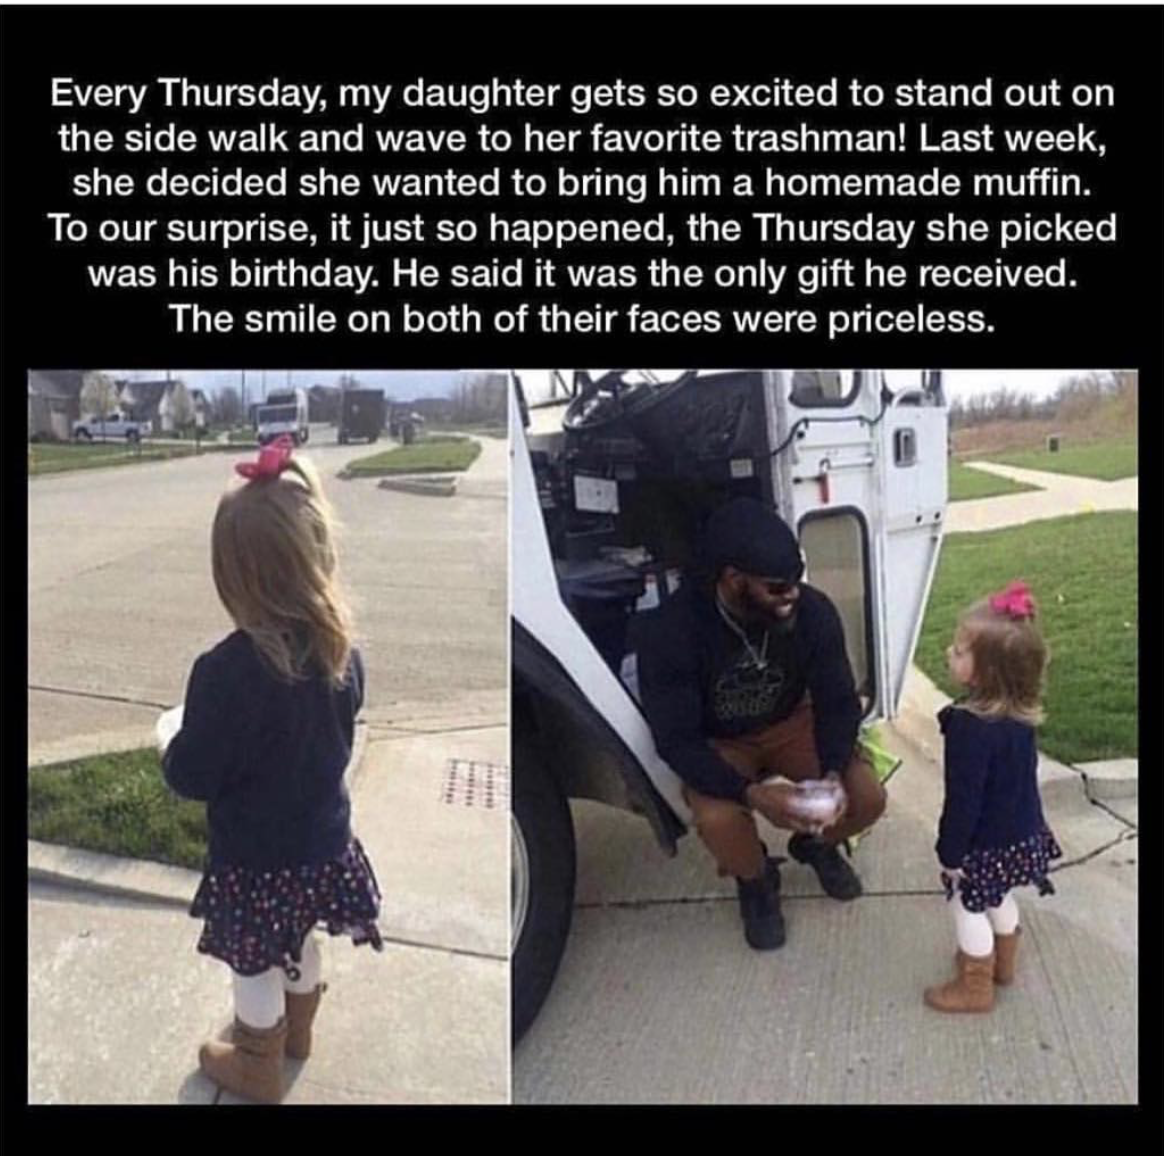 little girl and garbage man - Every Thursday, my daughter gets so excited to stand out on the side walk and wave to her favorite trashman! Last week, she decided she wanted to bring him a homemade muffin. To our surprise, it just so happened, the Thursday